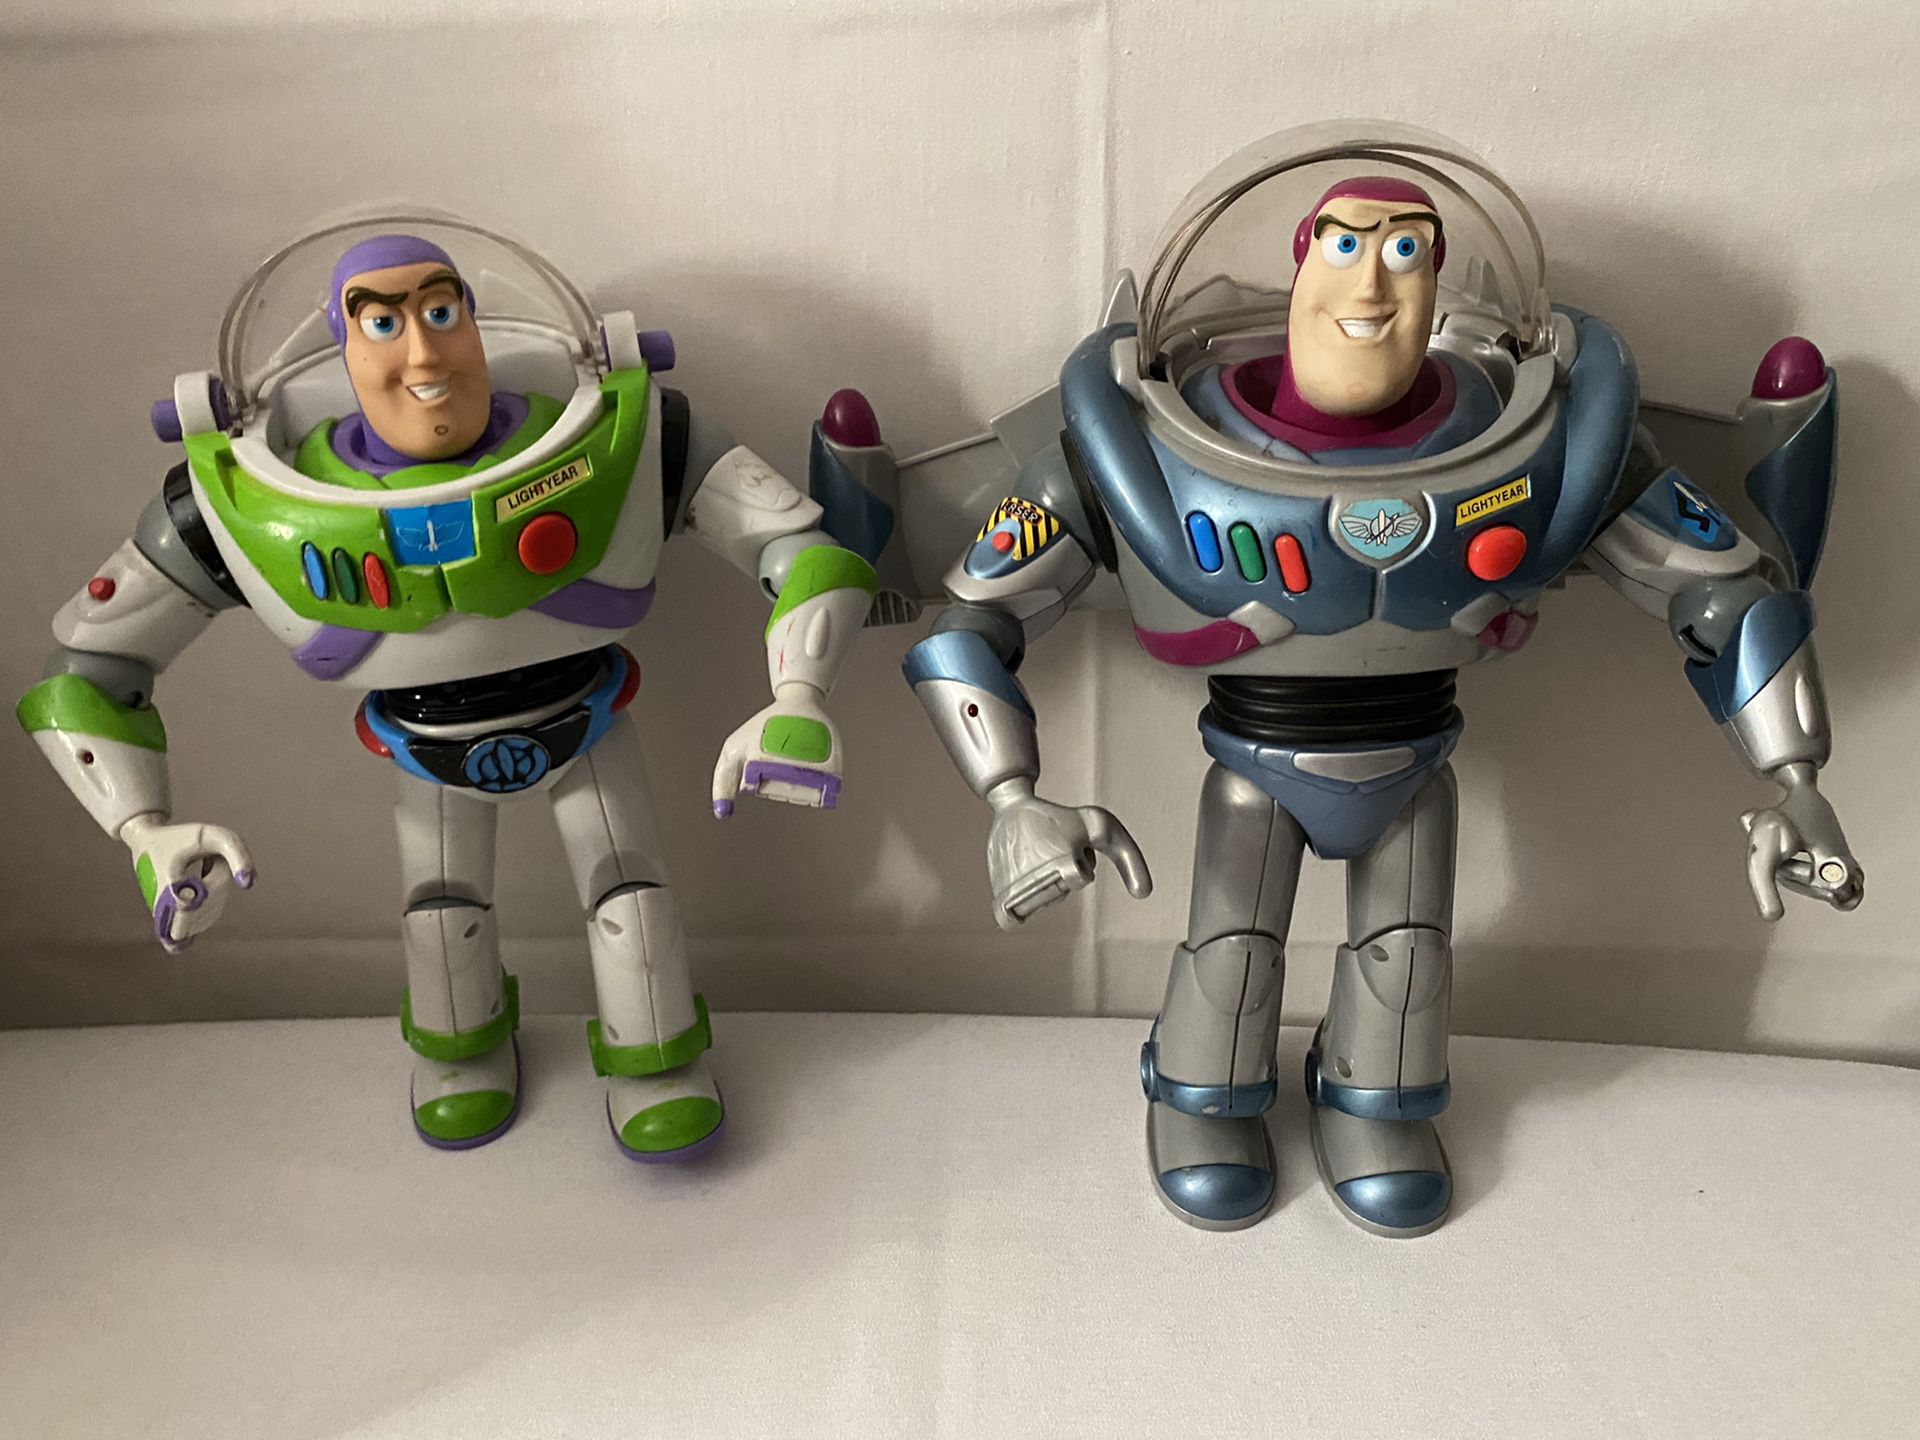 2 buzz light years $40 toy story